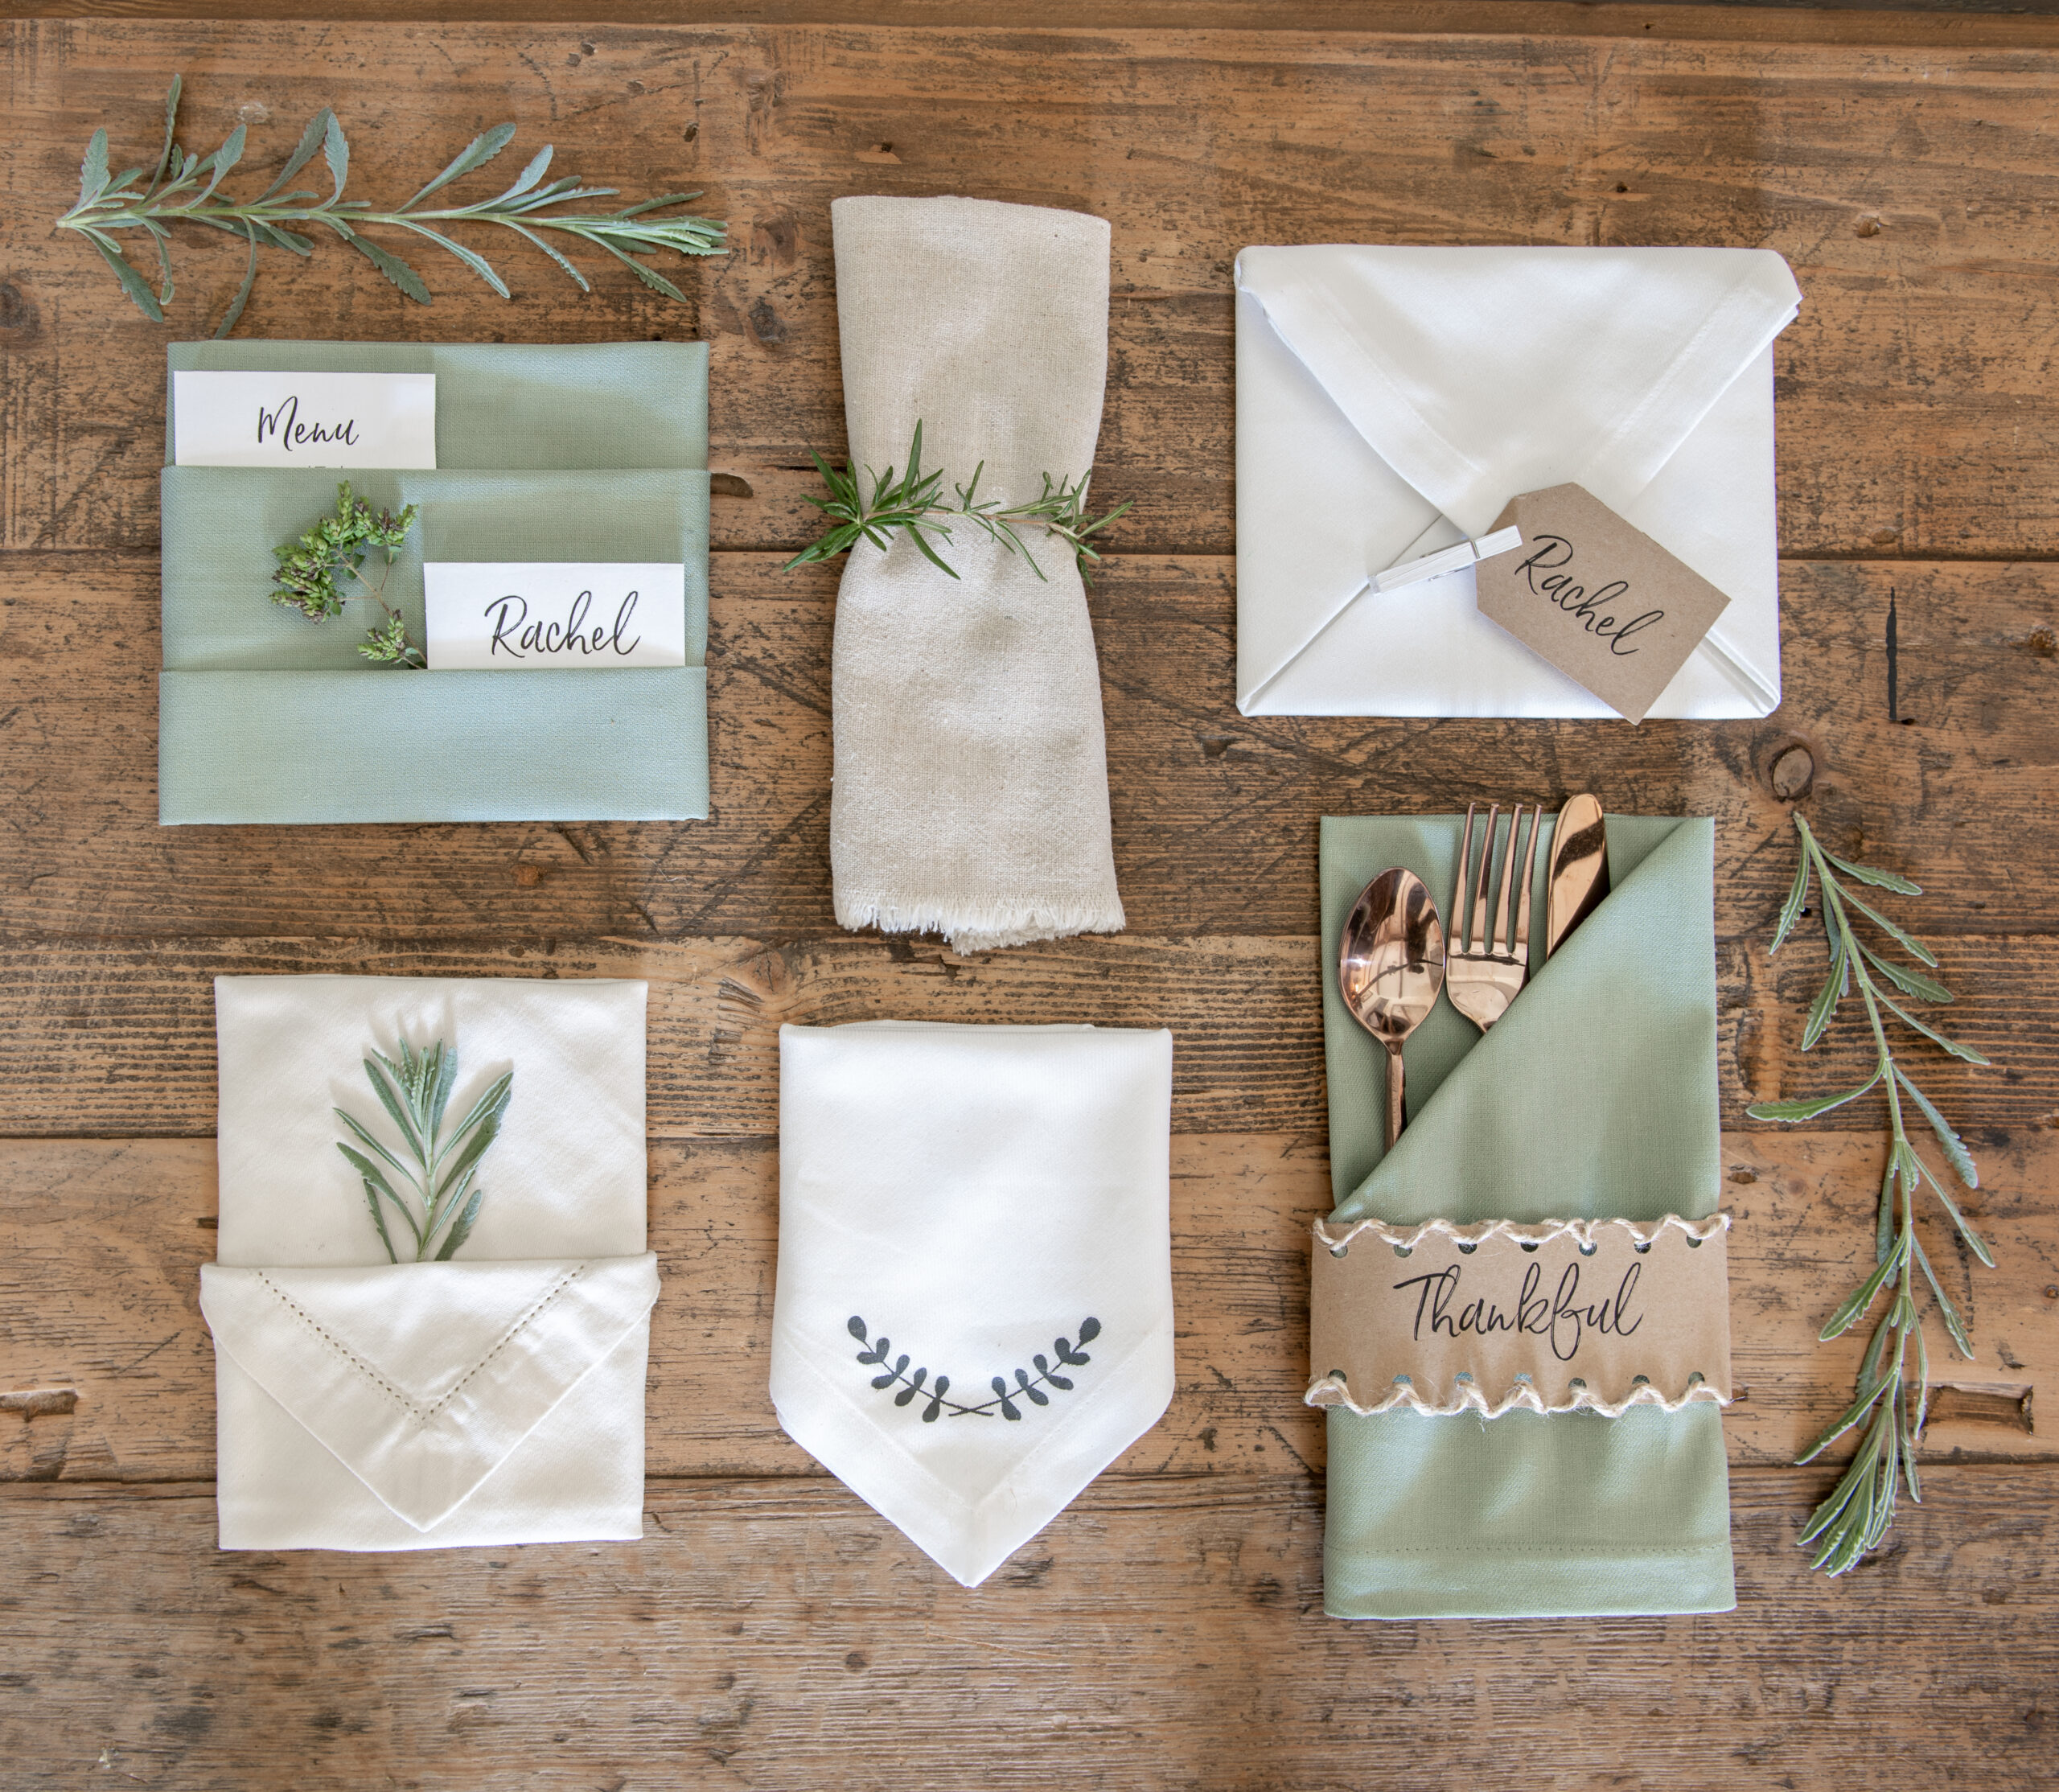 4 Napkin Folding Ideas to Spruce up Your Restaurant's Tables